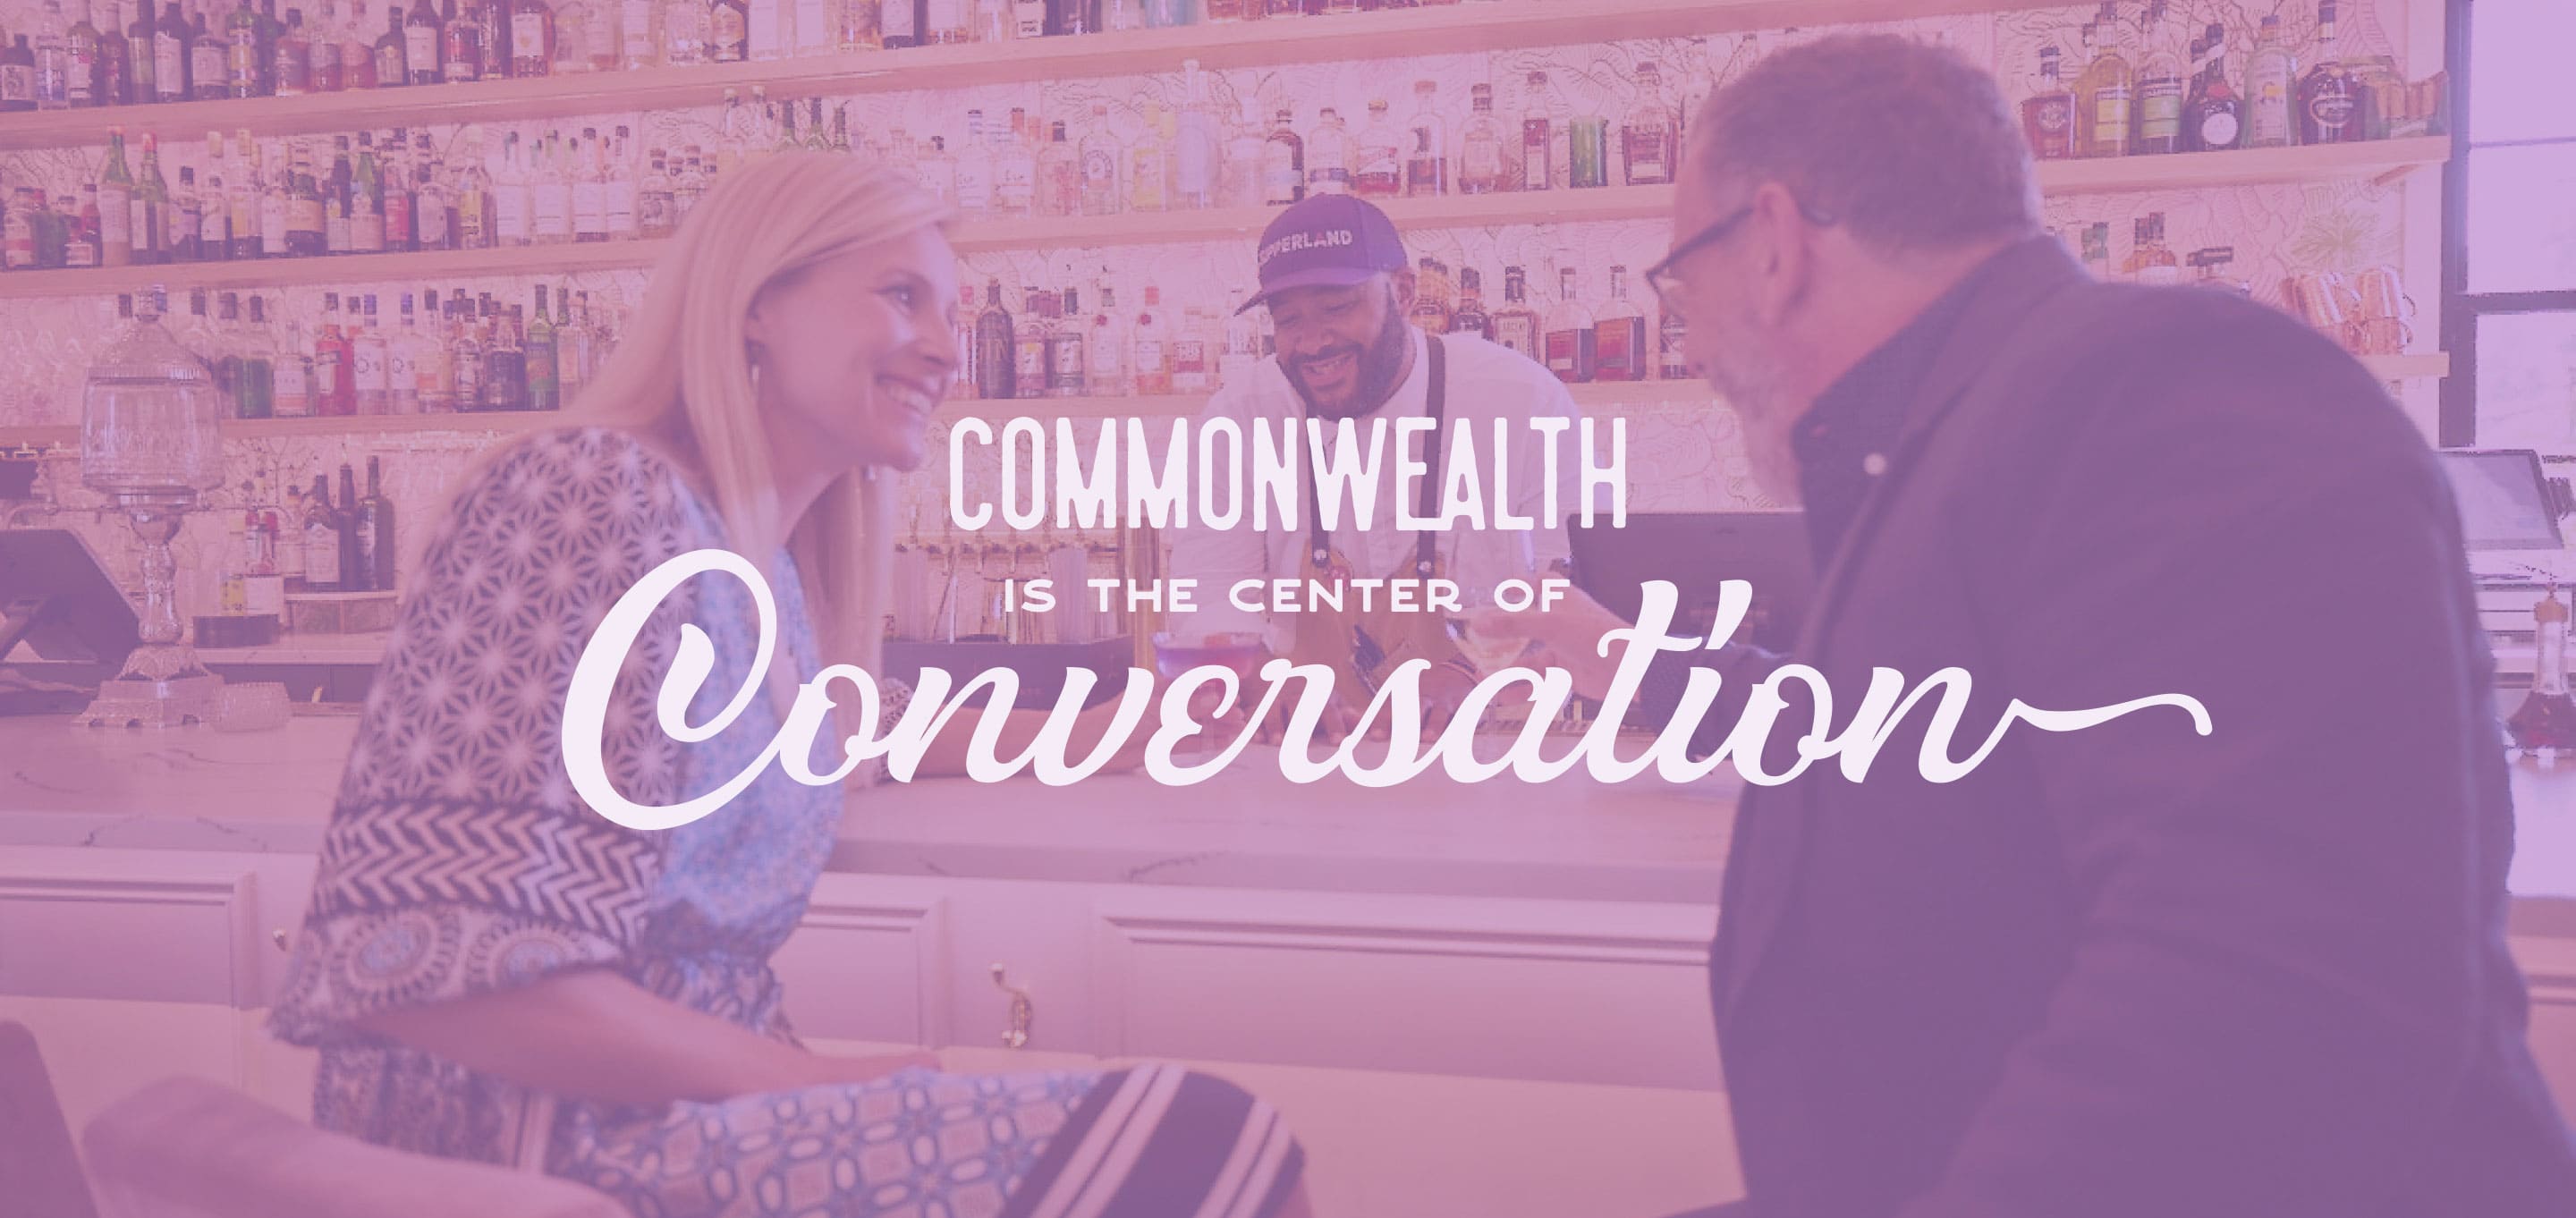 Promo for Commonwealth that says Commonwealth is the center of conversation